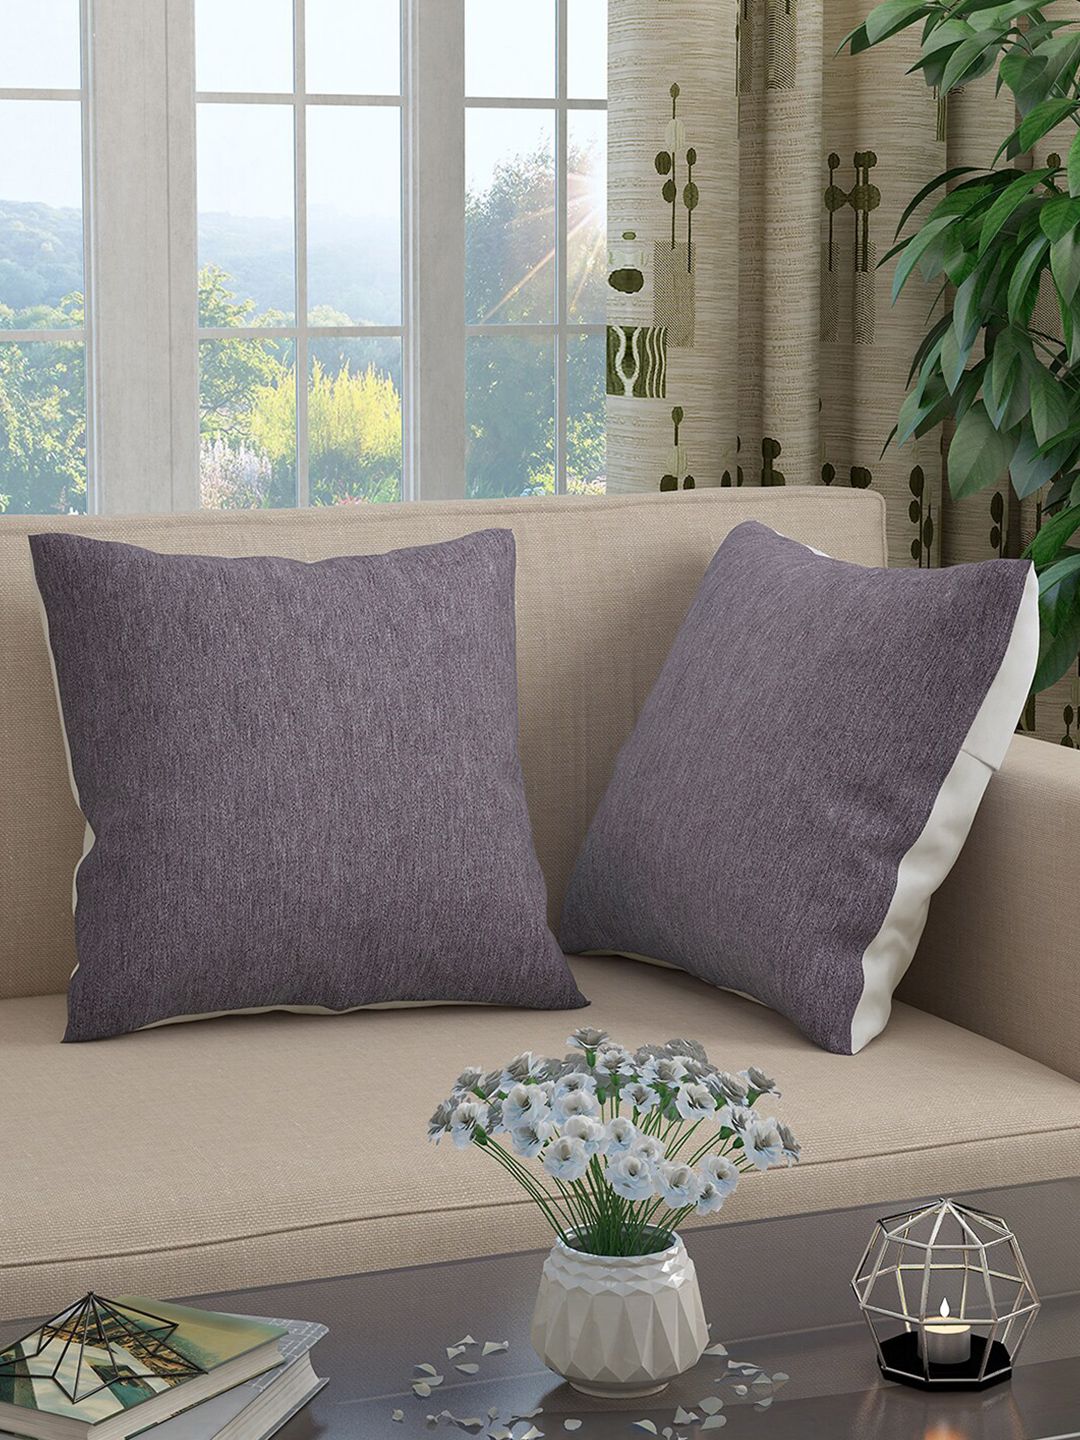 Story@home Violet & White Set of 2 Square Cushion Covers Price in India